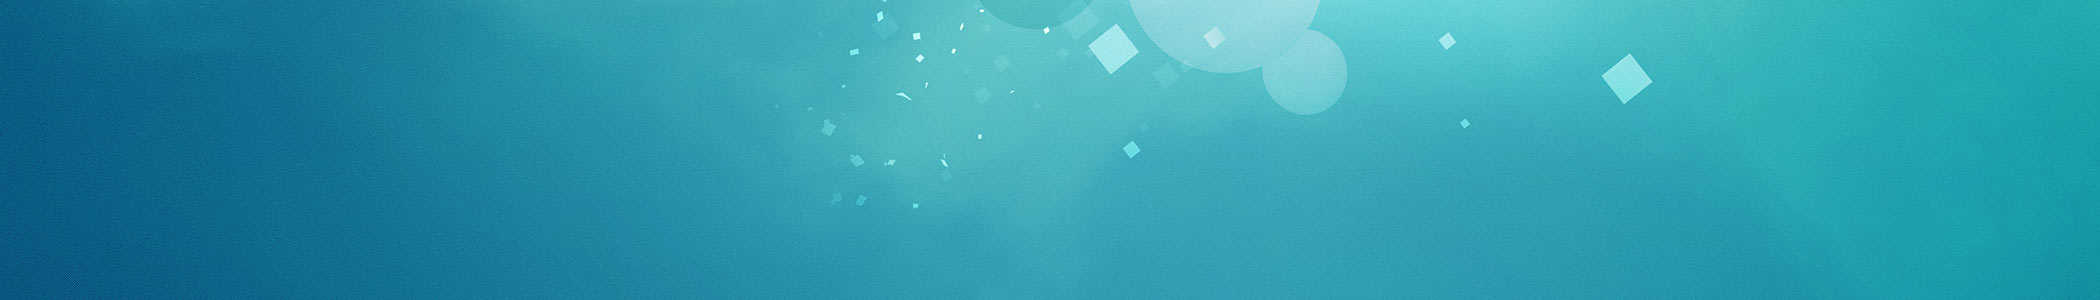 background-teal-2200